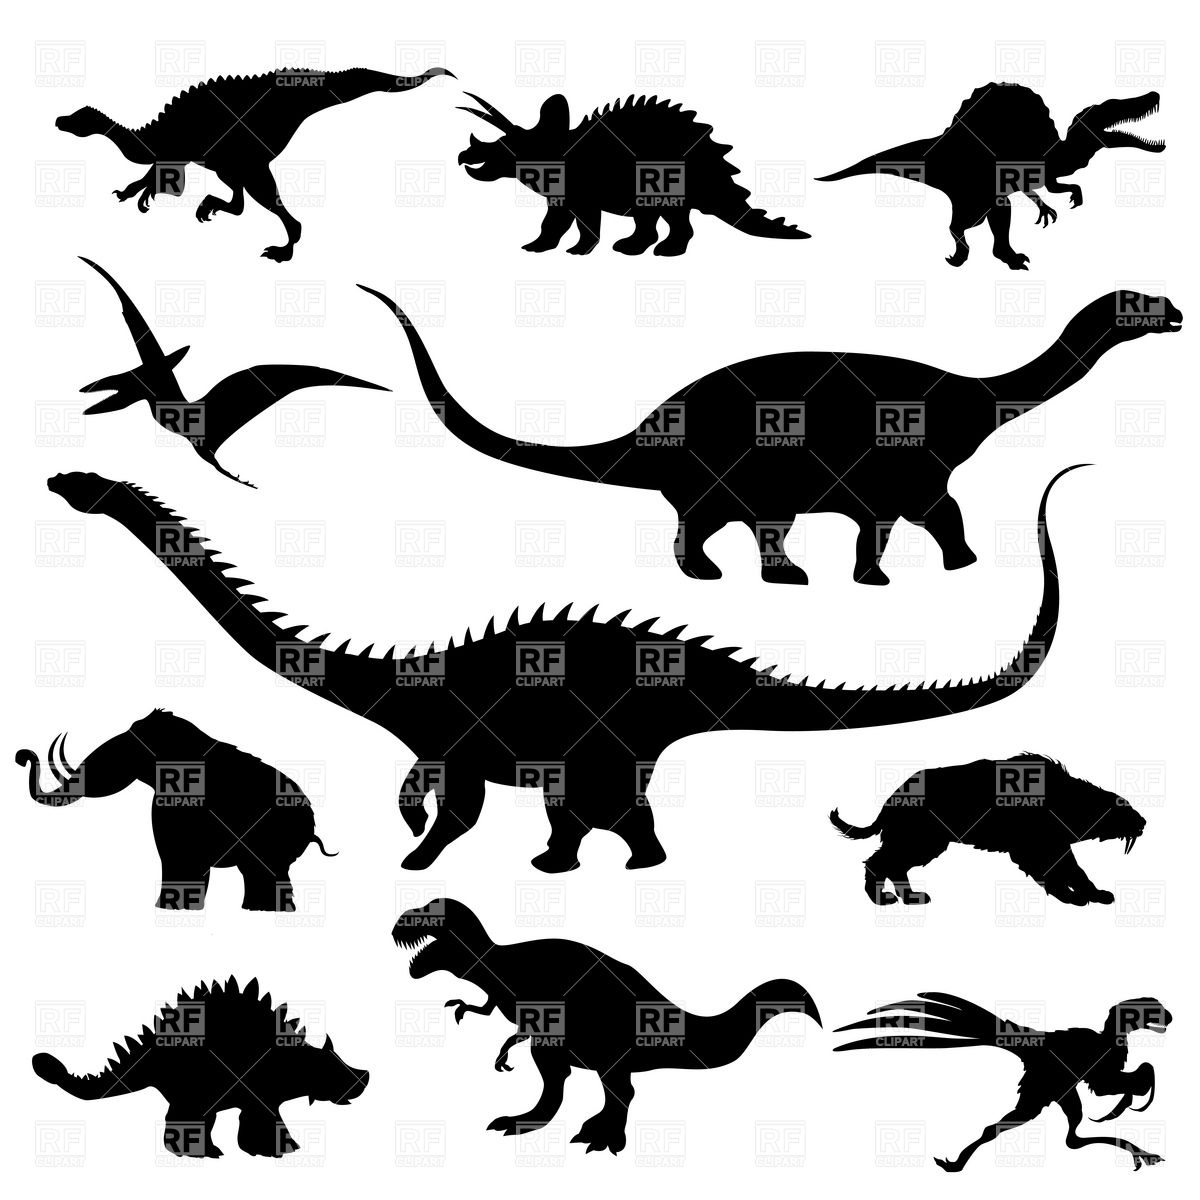 Dinosaur Silhouettes Against White Background Download Royalty Free